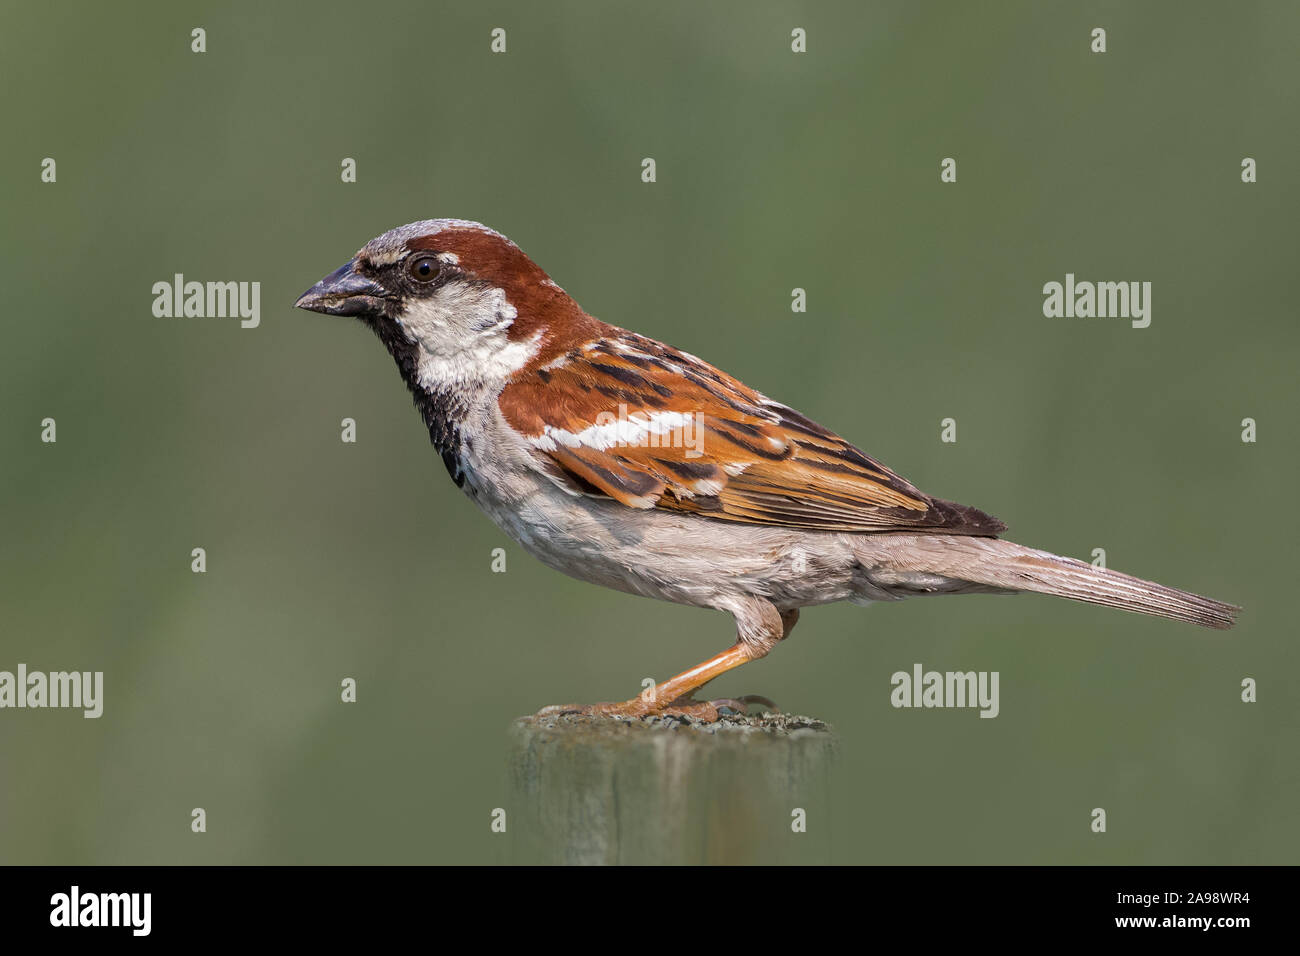 Extreme close up of Male House Sparrow sur wooden post in Green grass field Banque D'Images